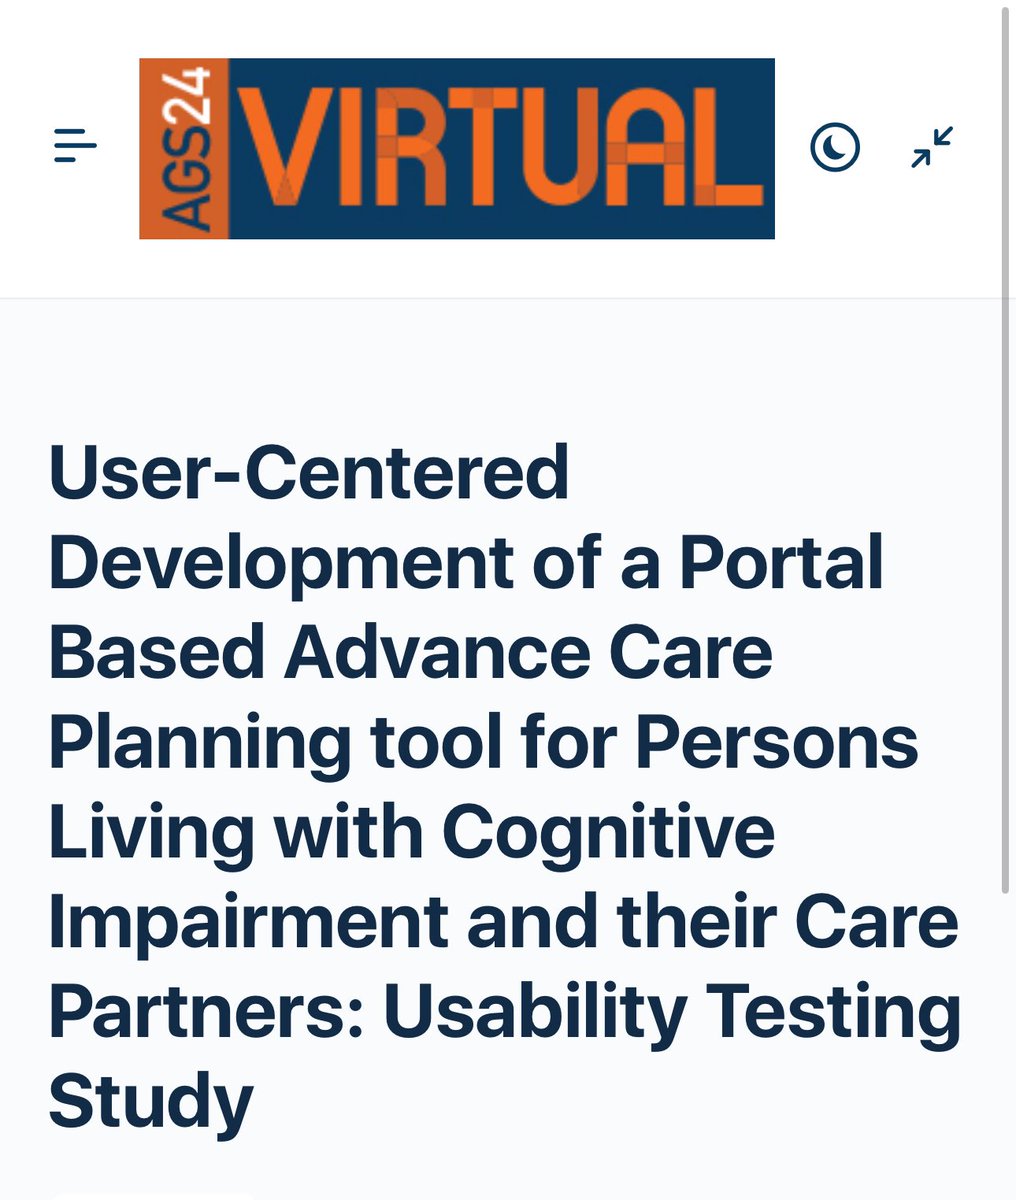 Thank you to all who attended our oral presentation on 'User-Centered Development of a Portal Based Advance Care Planning tool for Persons Living with Cognitive Impairment and their Care Partners: Usability Testing Study' at #AGS24 #shareddecisionmaking